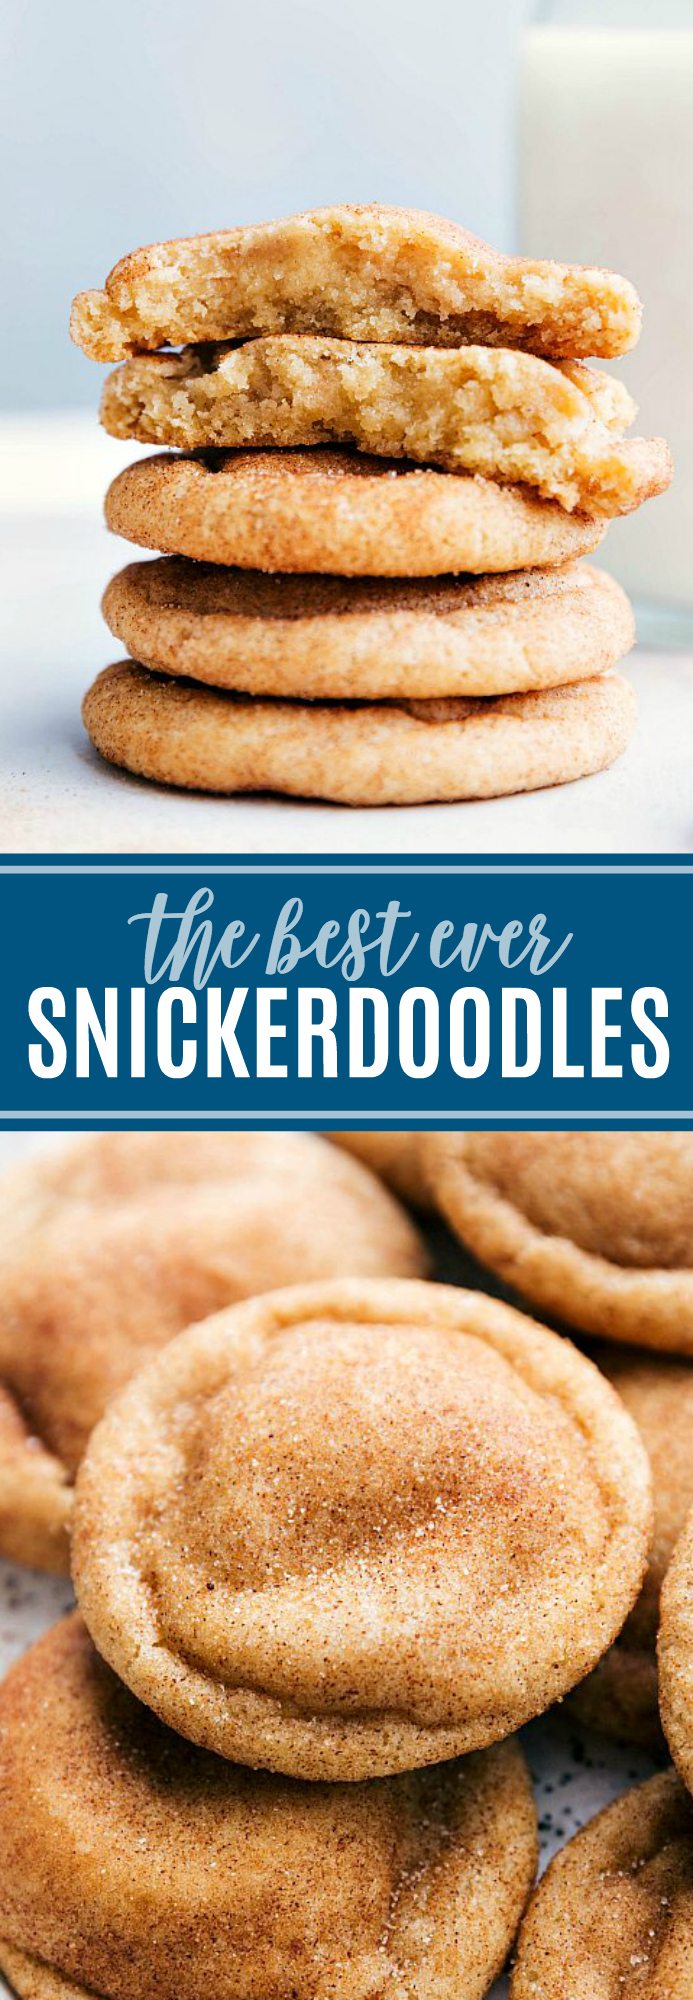 The ultimate BEST EVER SNICKERDOODLE COOKIES! Crisp edges, soft and chewy center, and SO much flavor! These are the BEST EVER! Recipe via chelseasmessyapron.com | #snickerdoodle #cookie #dessert #bake #baking #treat #holiday #cookies #christmas #cinnamon #sugar #easy #video #tutorial